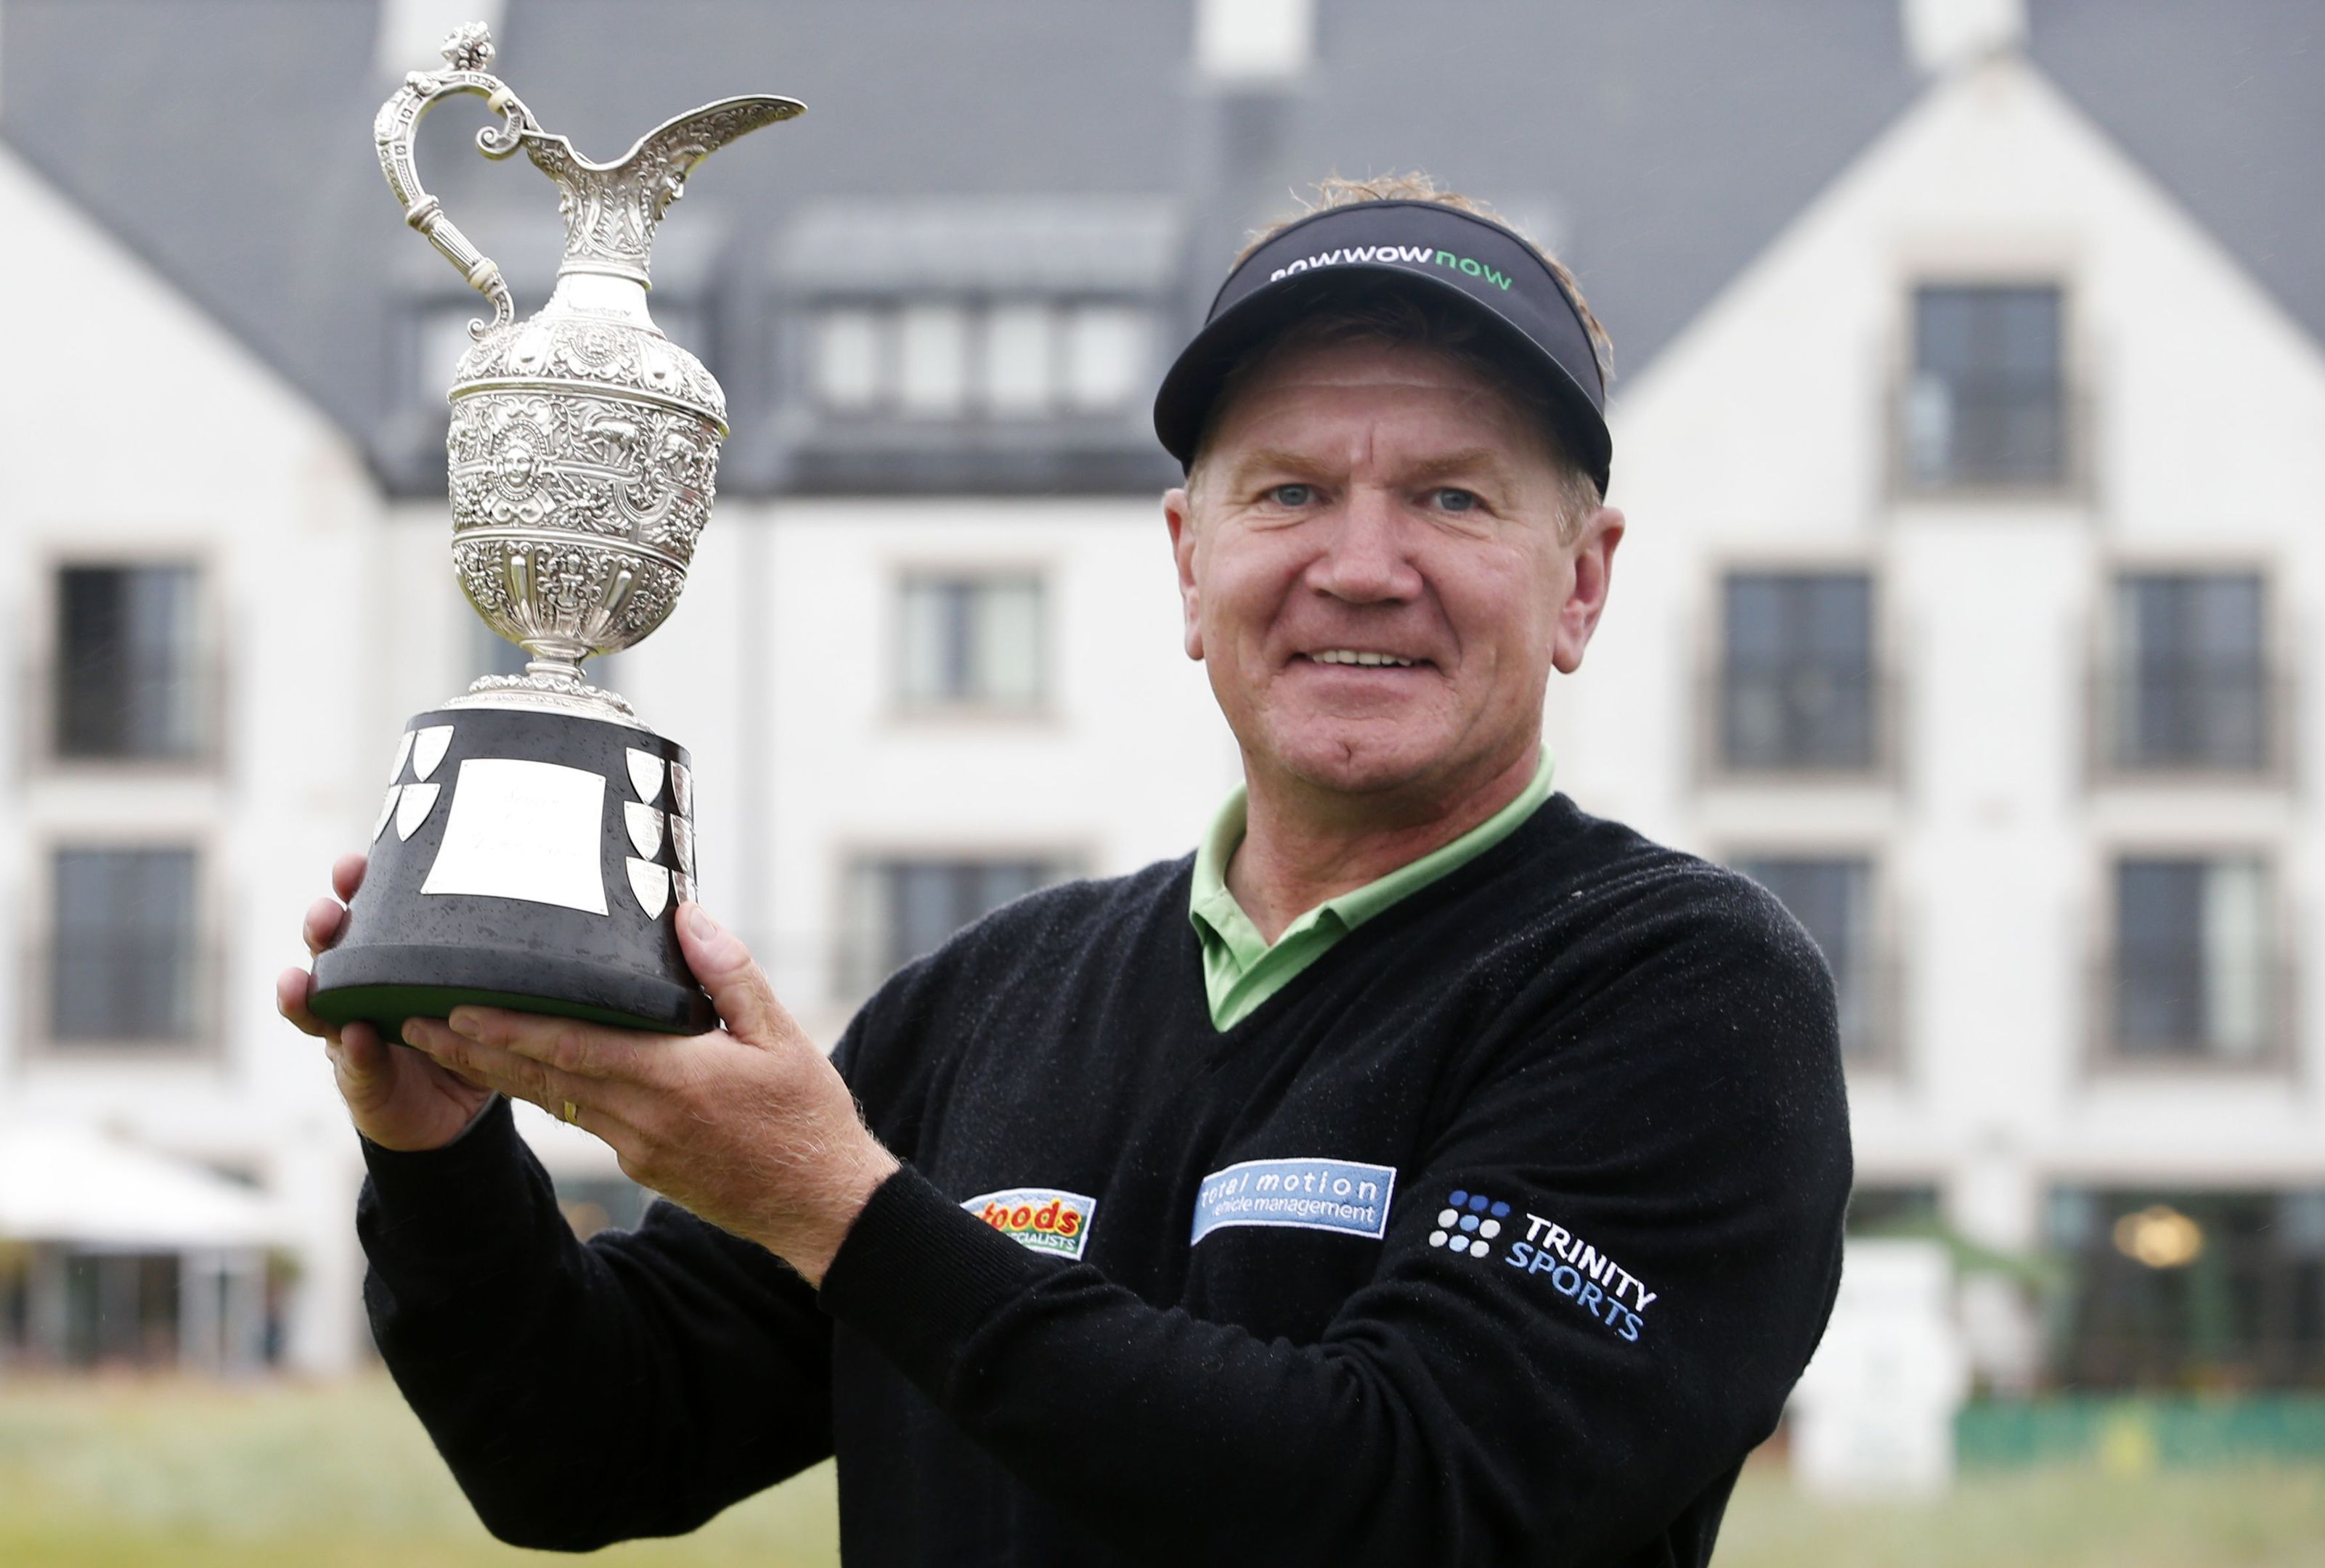 England's Paul Broadhurst with the Senior Claret Jug after his victory at the Senior Open Championship at Carnoustie last year. The tournament has been credited with helping Angus reach a record number of visitors last year